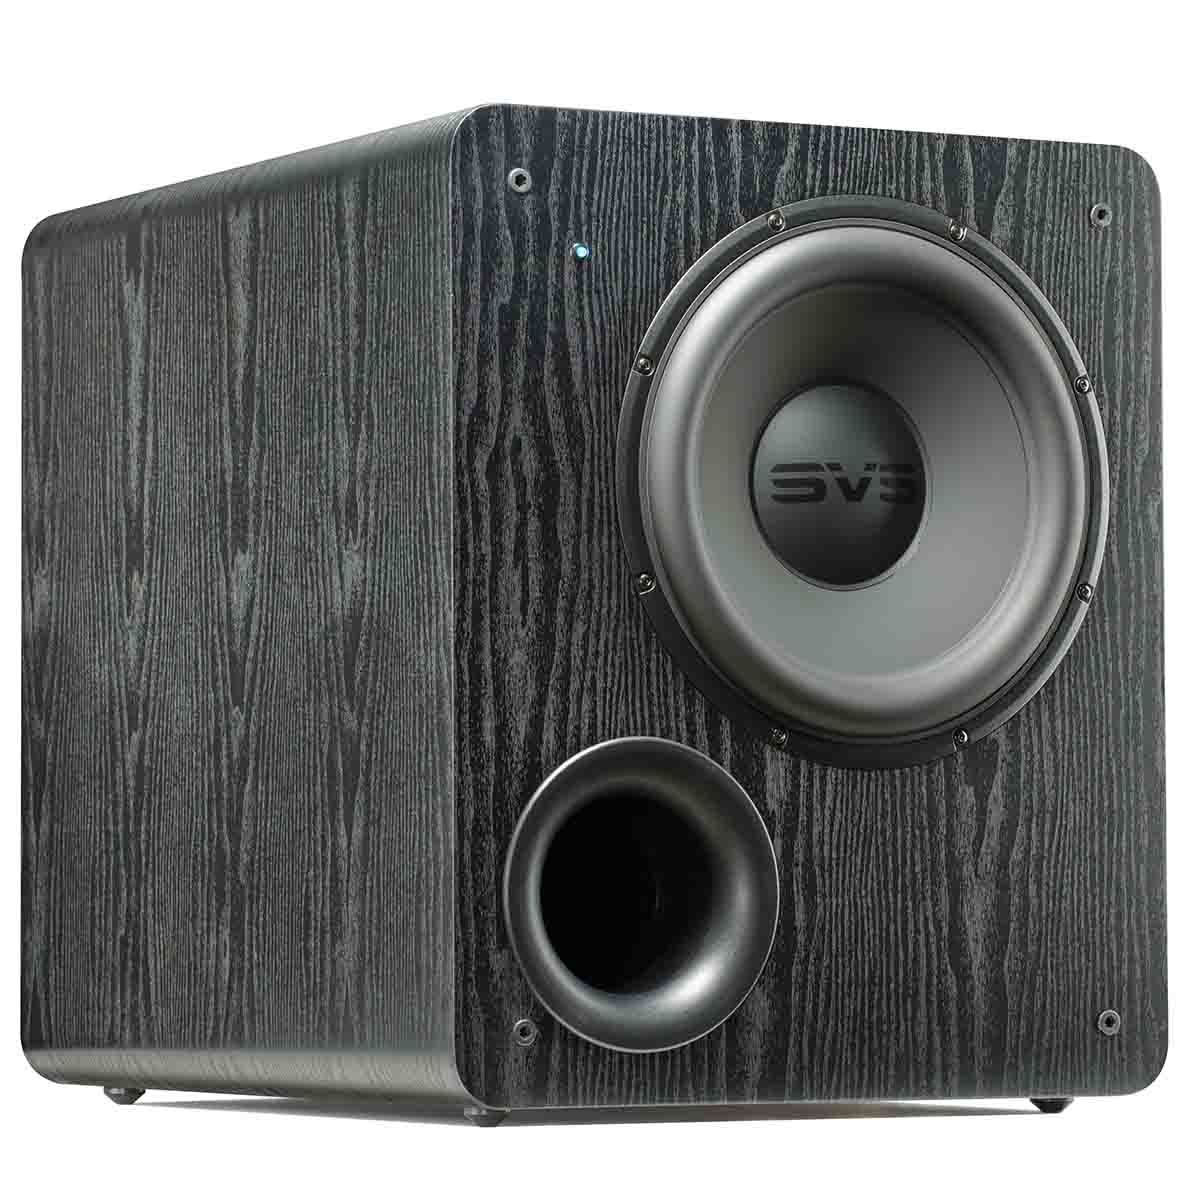 SVS PB-2000 12" Ported Subwoofer - Premium Black Ash - angled front view without grille